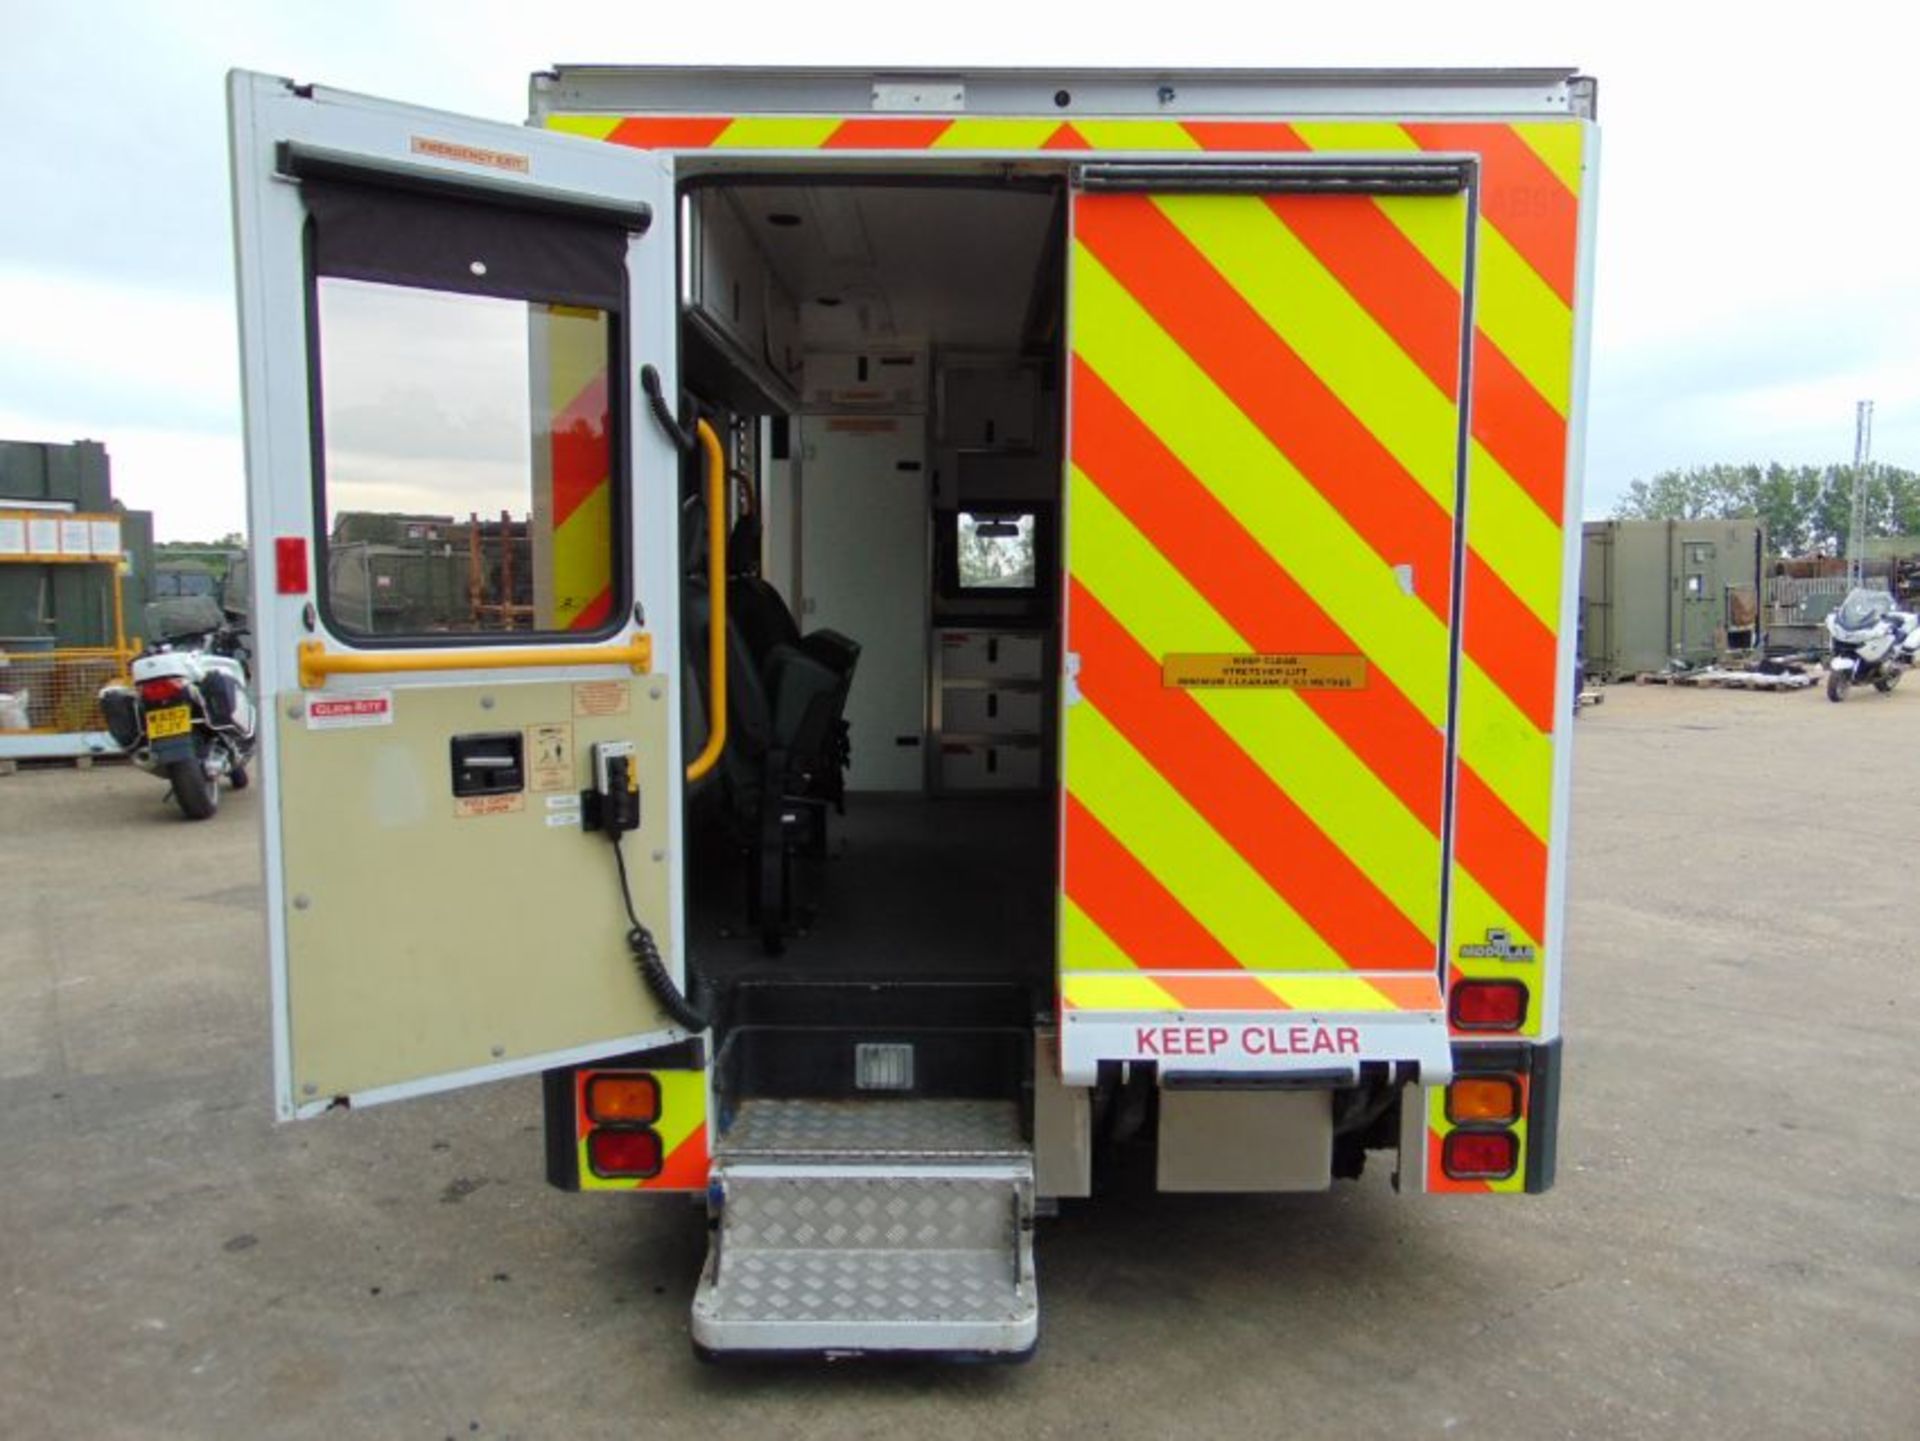 Recent Released by Atomic Weapons Establishment a 2002 Mercedes 418 CDi Ambulance ONLY 32,825 Miles! - Image 9 of 34